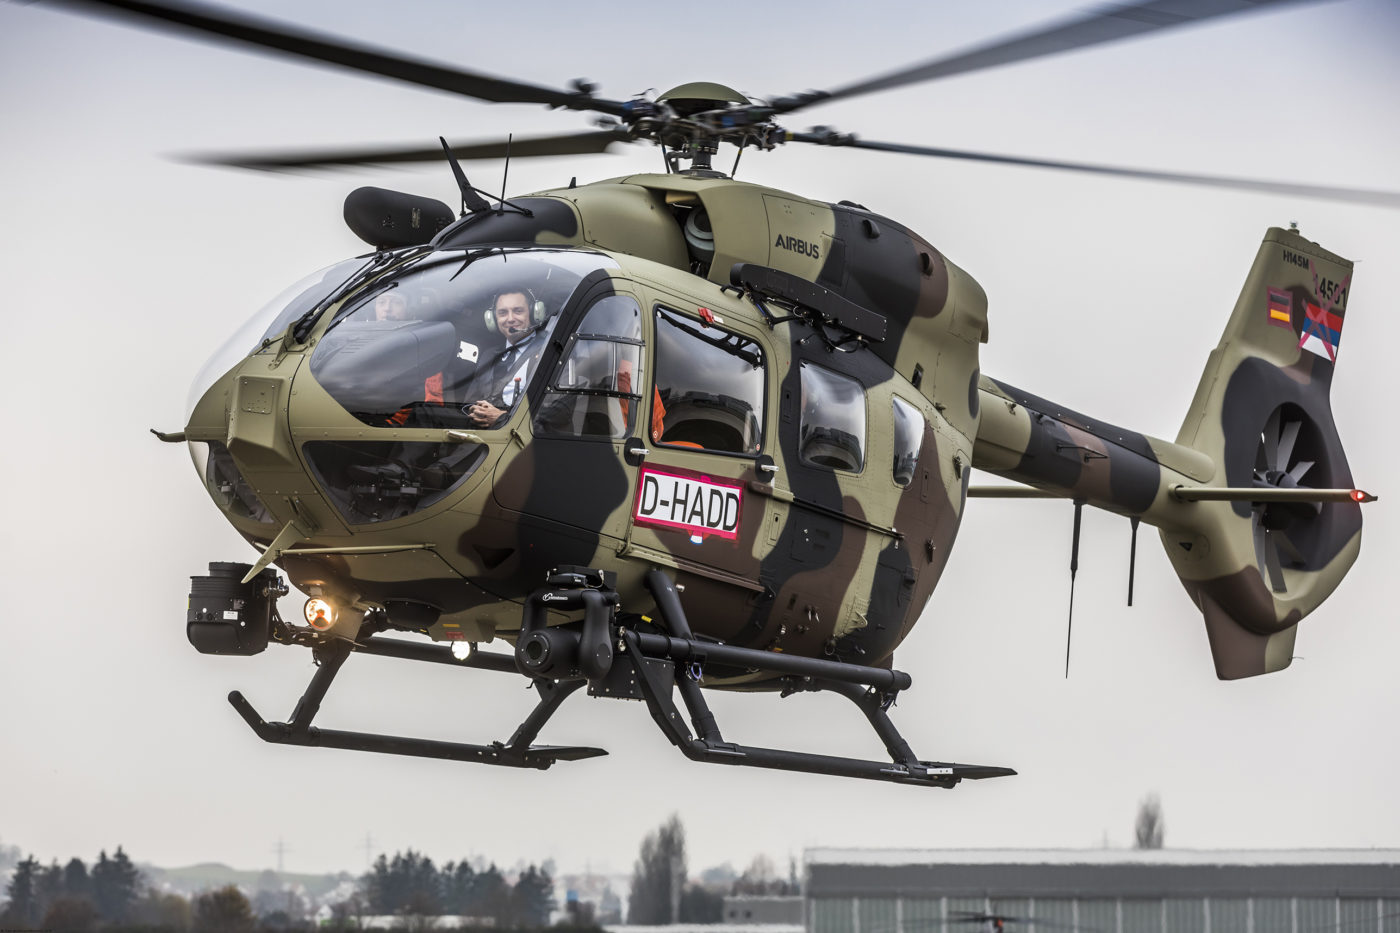 The Serbian Air Force’s H145Ms will be equipped with a fast roping system, high-performance camera, fire support equipment, ballistic protection as well as an electronic countermeasures system. Christian Keller Photo